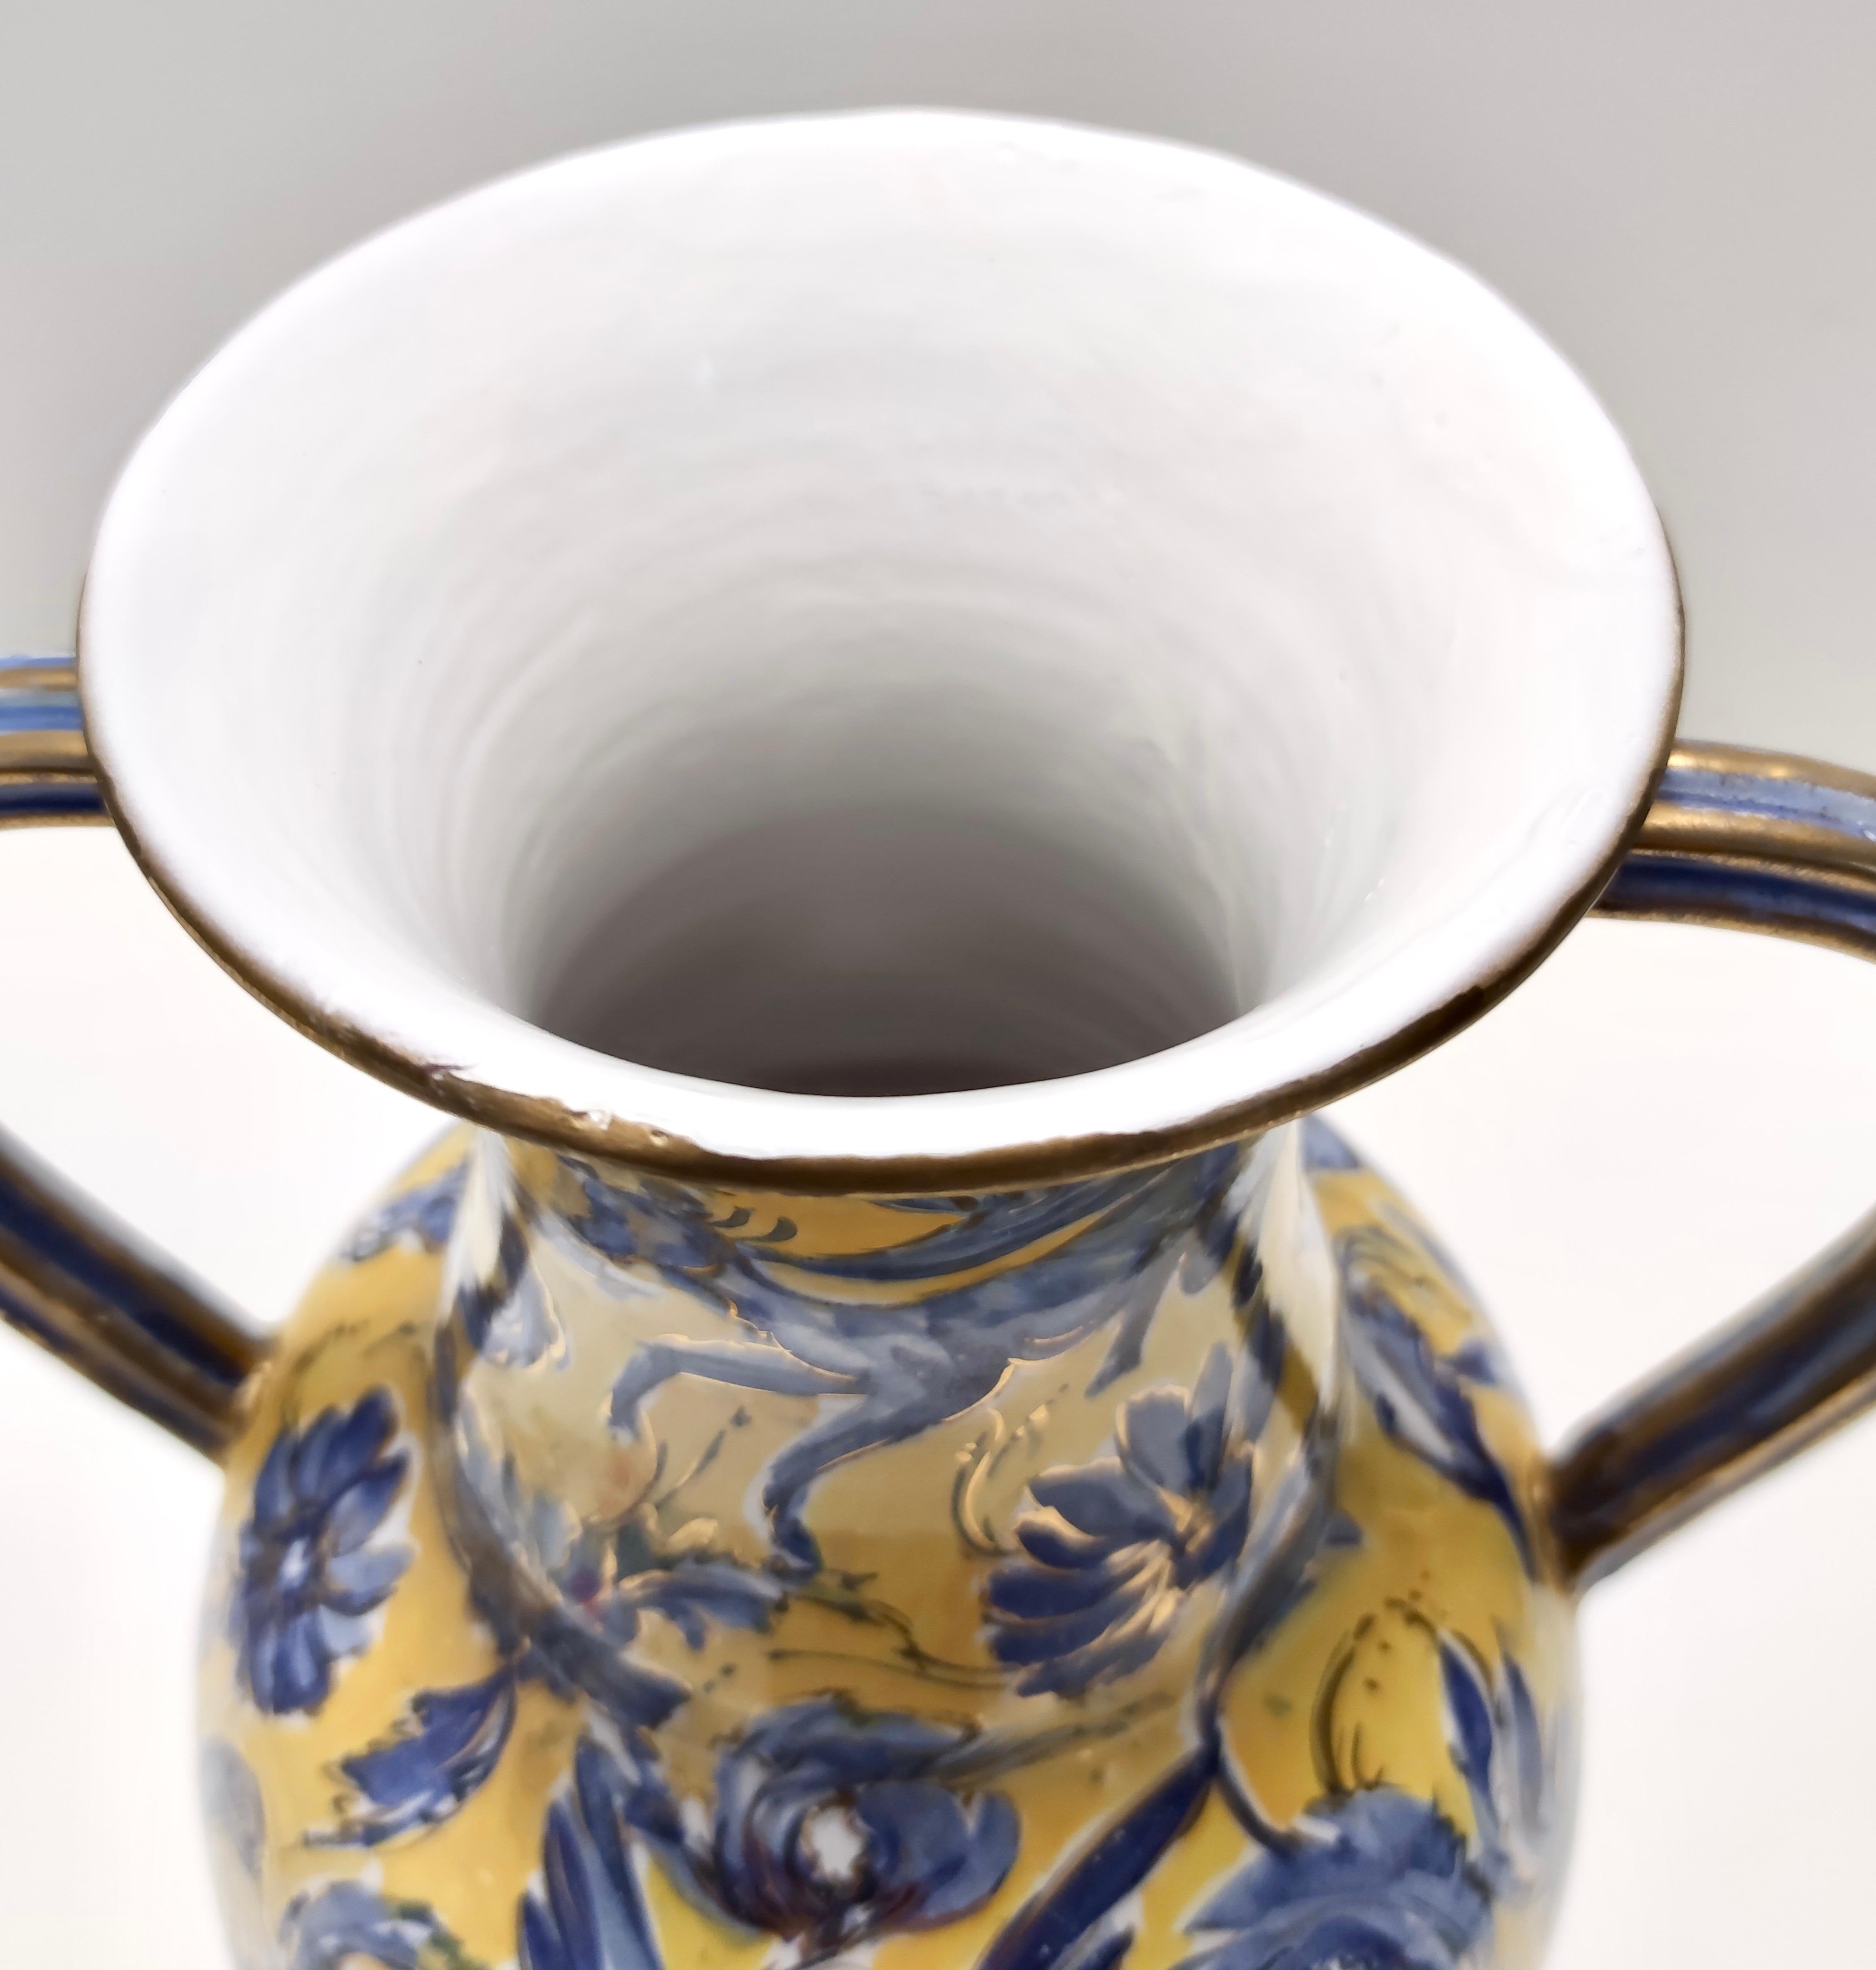 Mid-20th Century Handmade Yellow and Blue Glazed Ceramic Amphora Vase by Zulimo Aretini, Italy For Sale